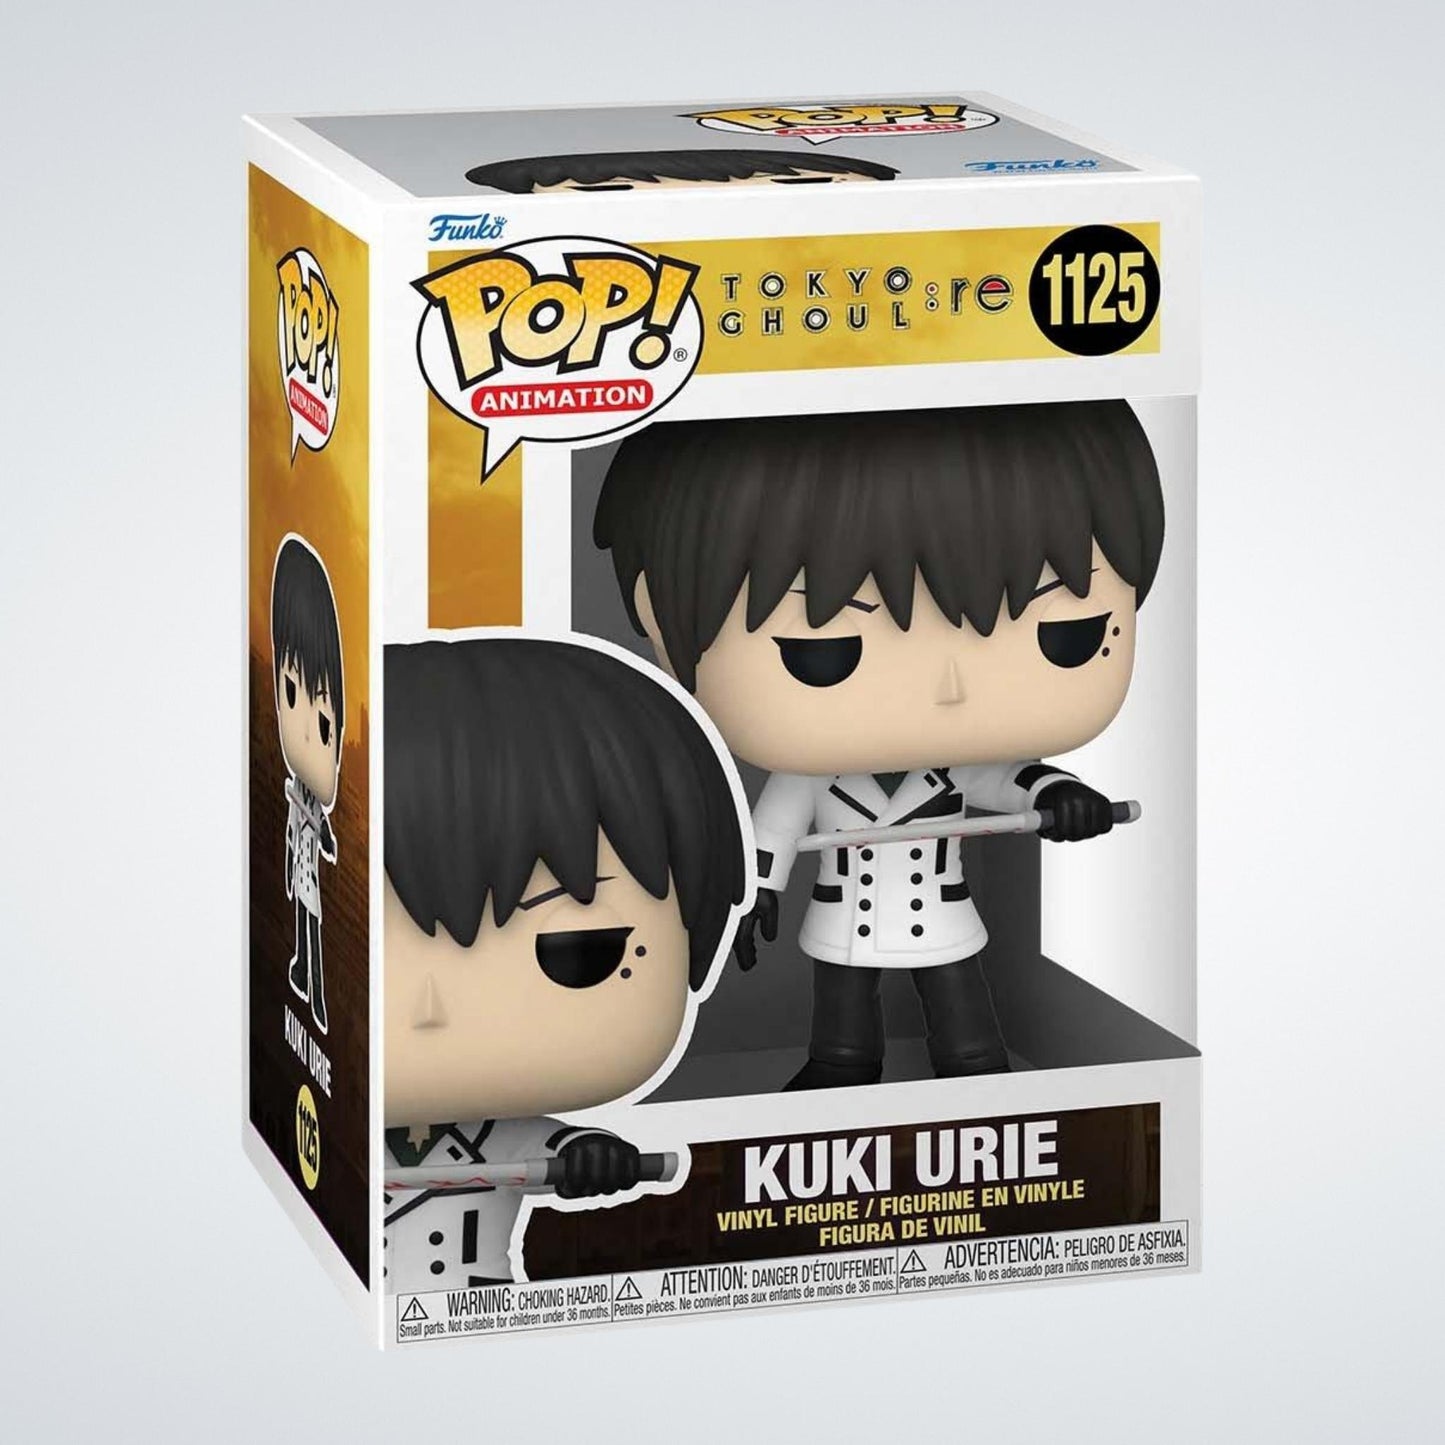 Load image into Gallery viewer, Kuki Urie (Tokyo Ghoul:re) Funko Pop!
